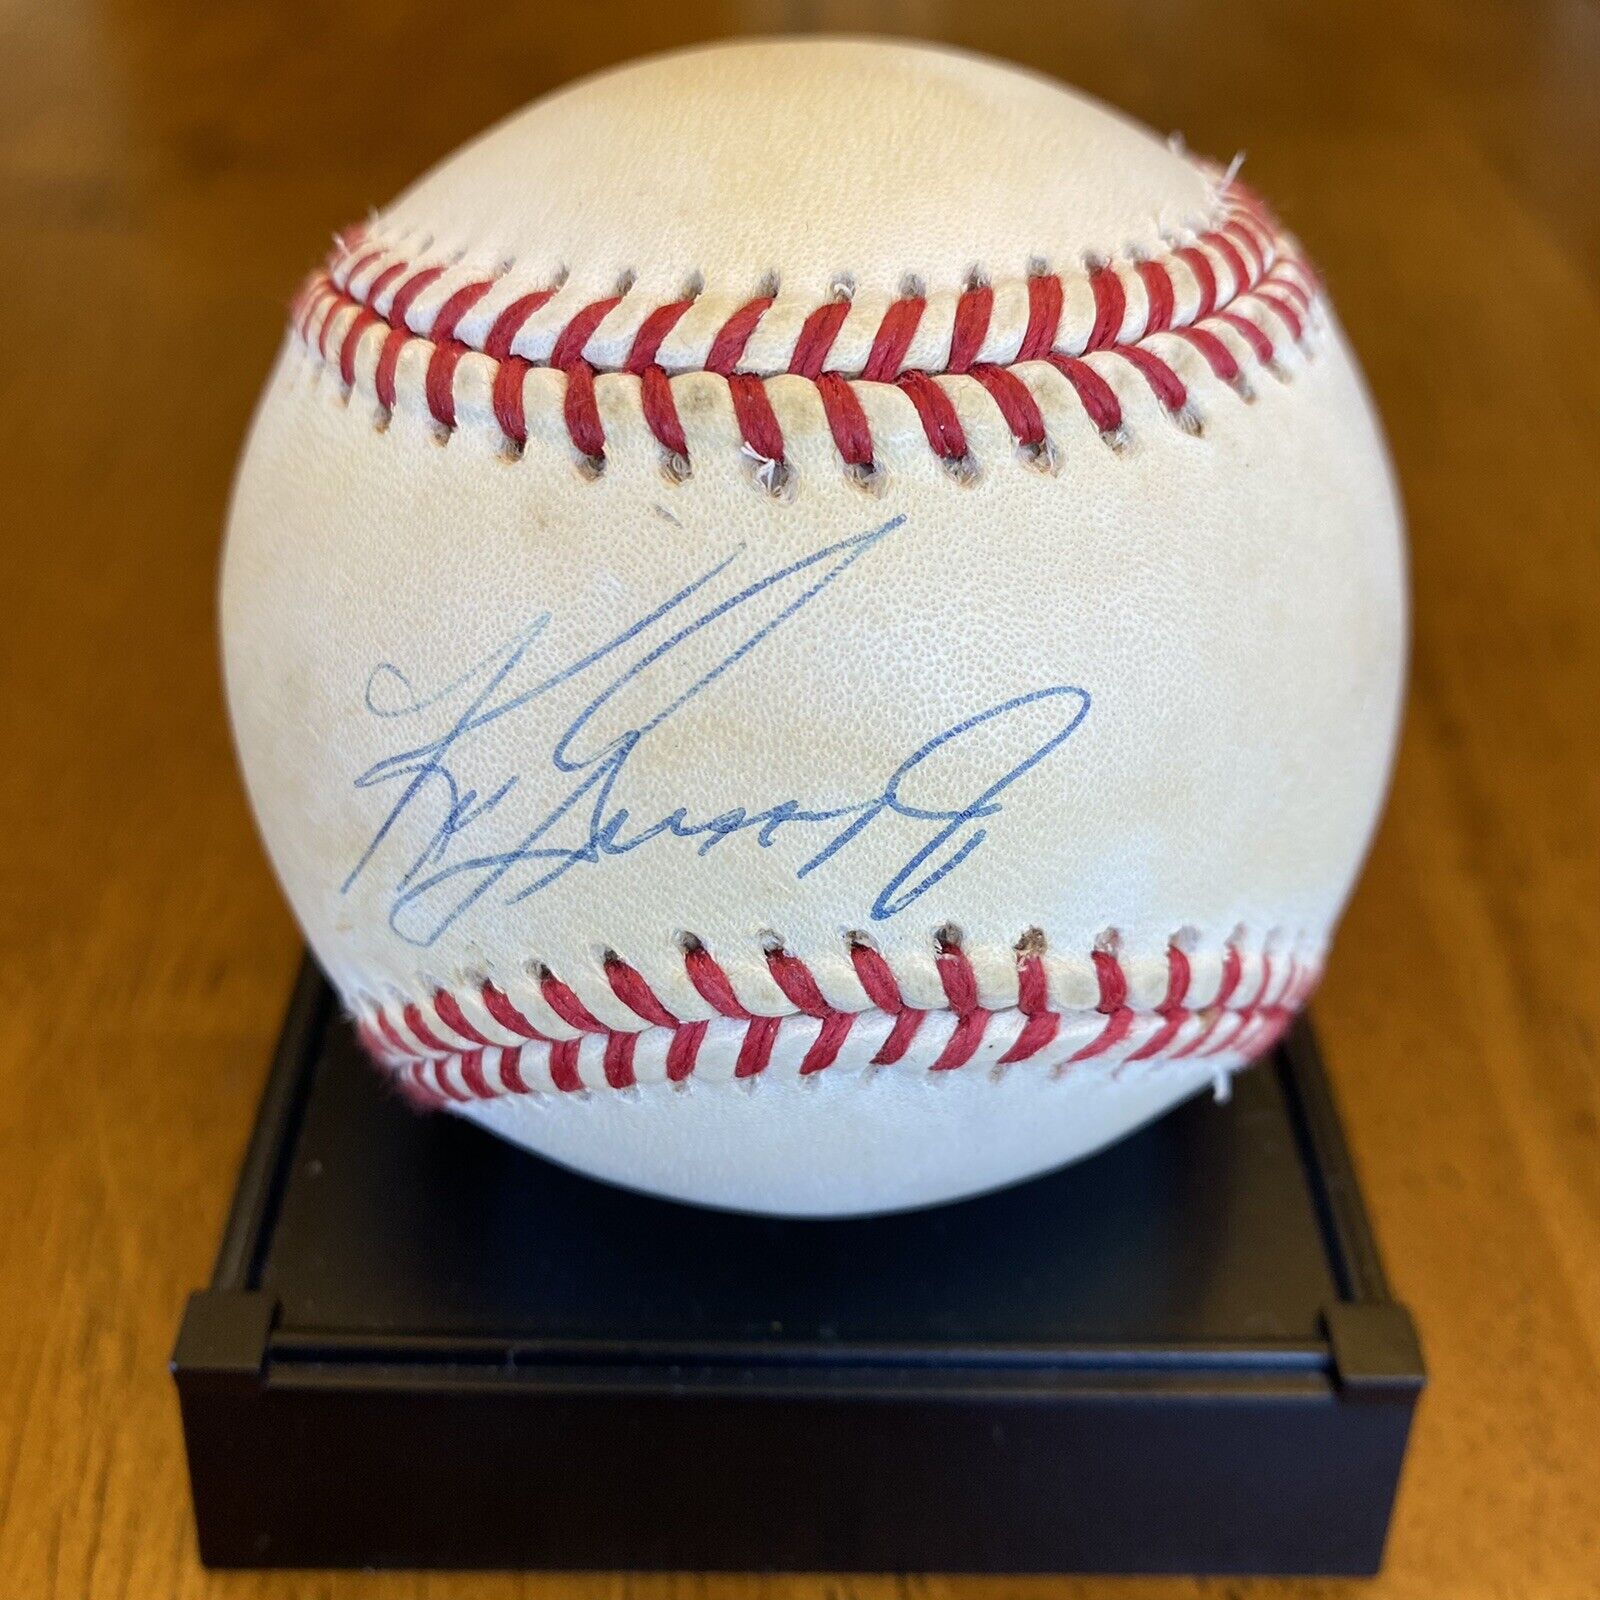 Ken Griffey Jr. Signed Autographed Official American League Baseball Mariners